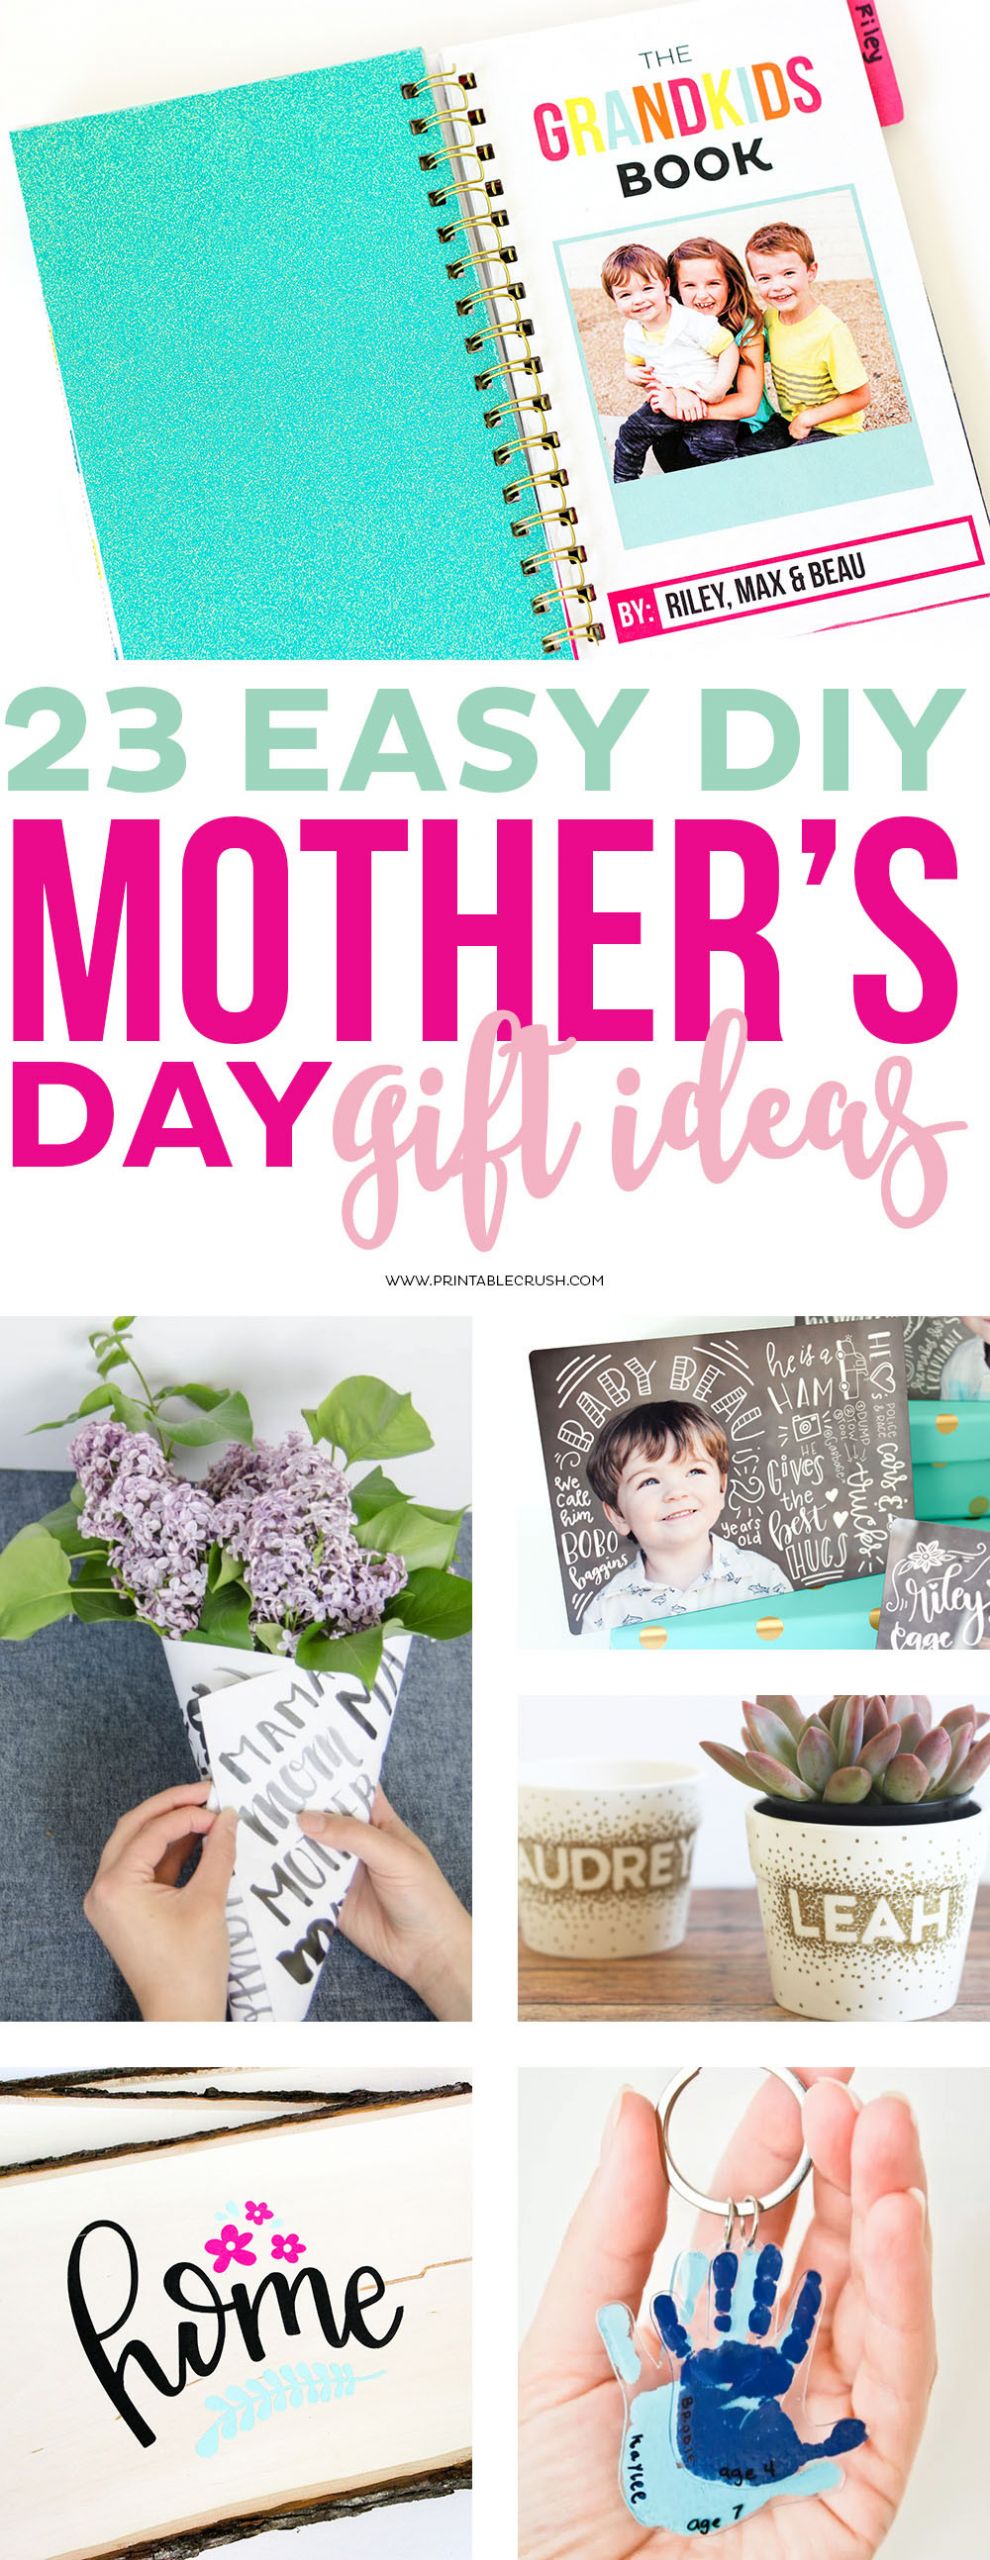 Easy DIY Mothers Day Gifts
 23 Easy DIY Mother s Day Gift Ideas Printable Crush